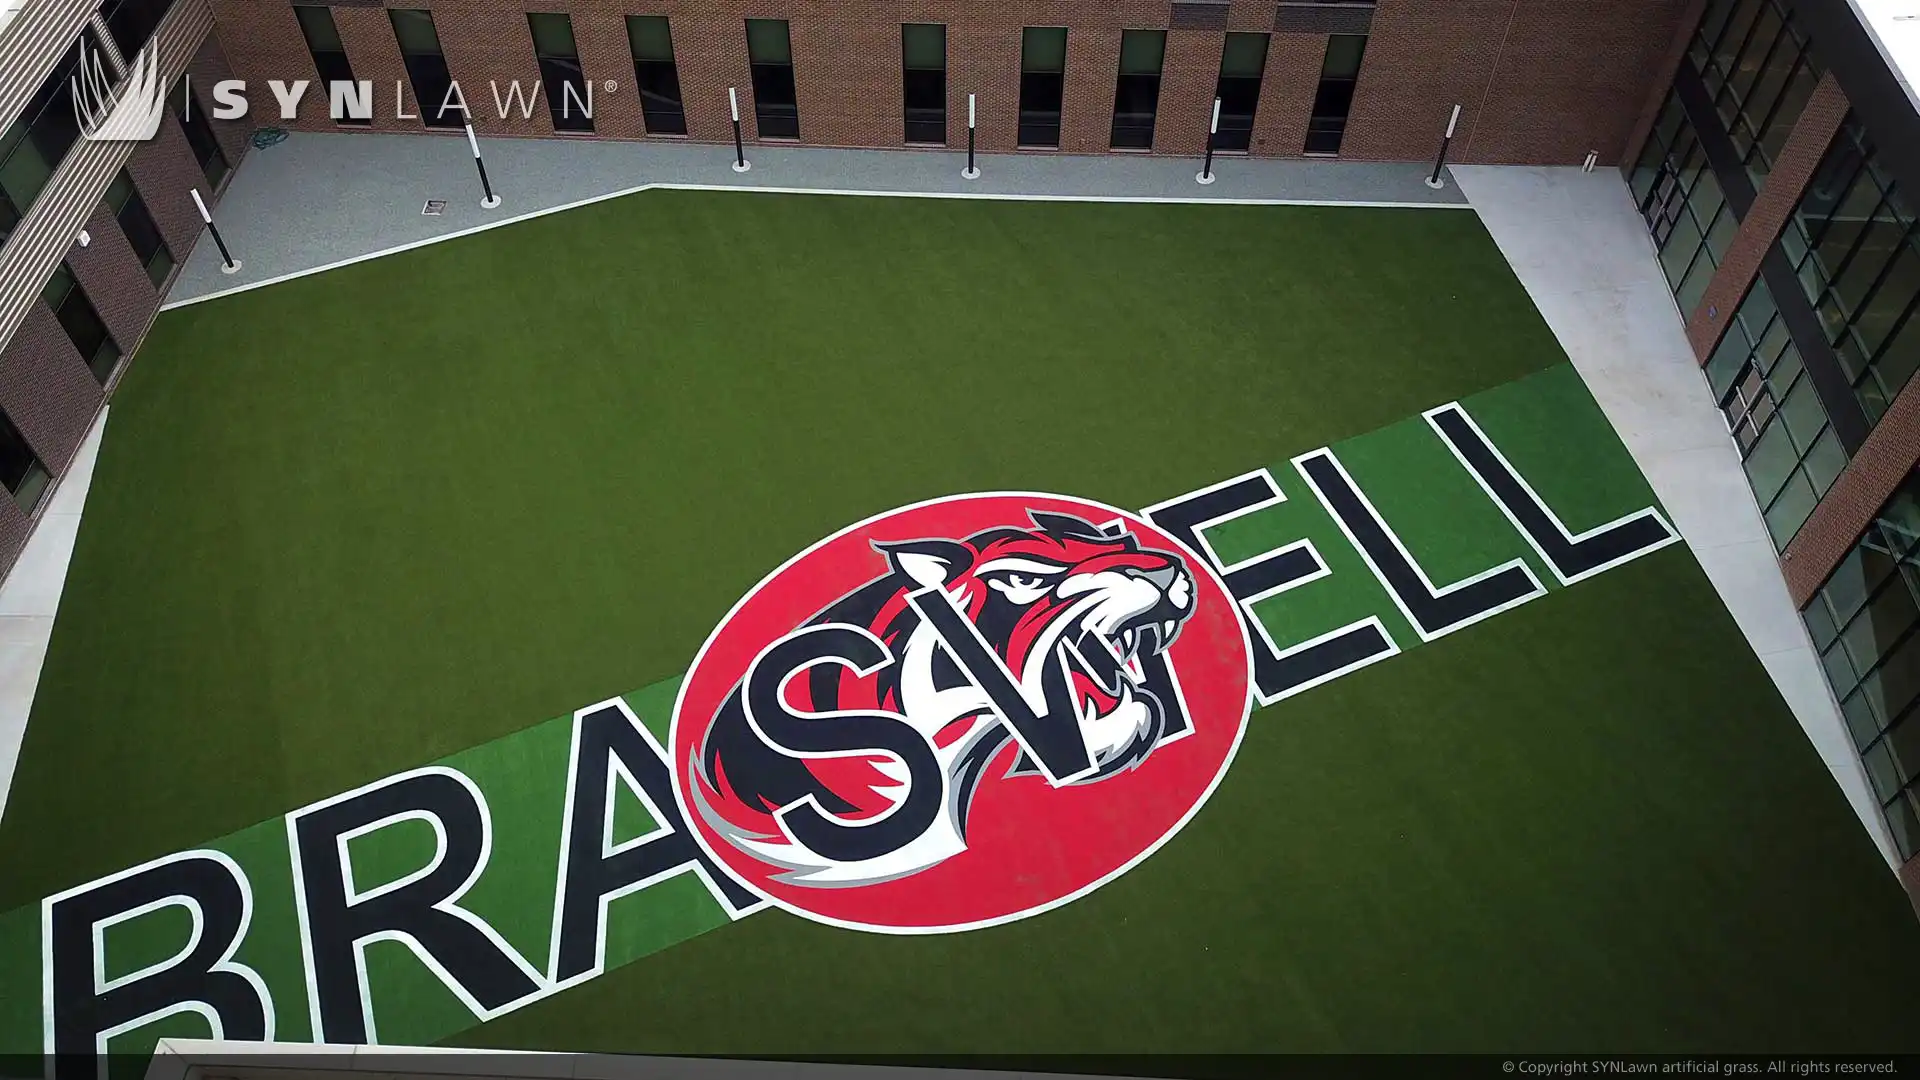 Texas High School Elevates Image with Inlaid Grass Logos and Multi-Use Rec Areas